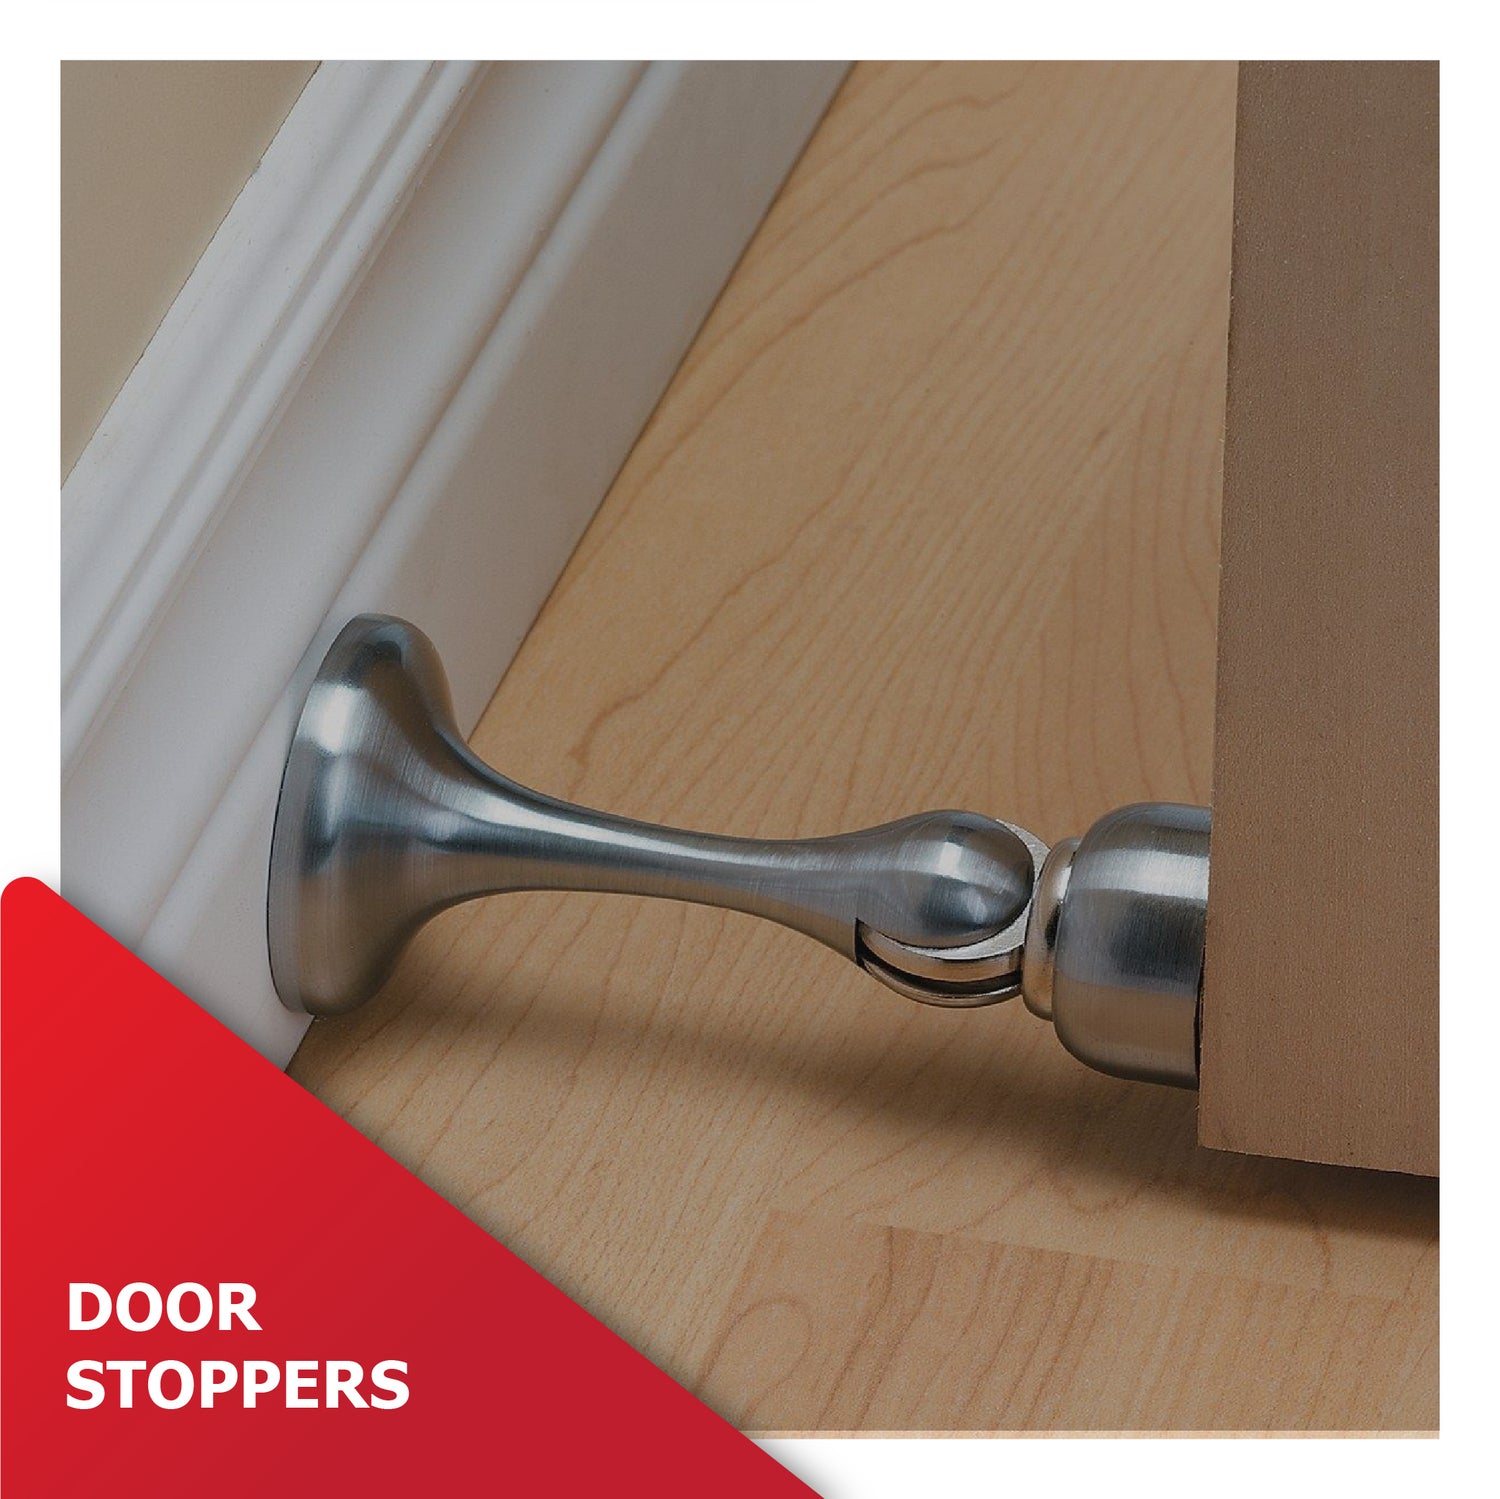 Various door stoppers in different designs and finishes.